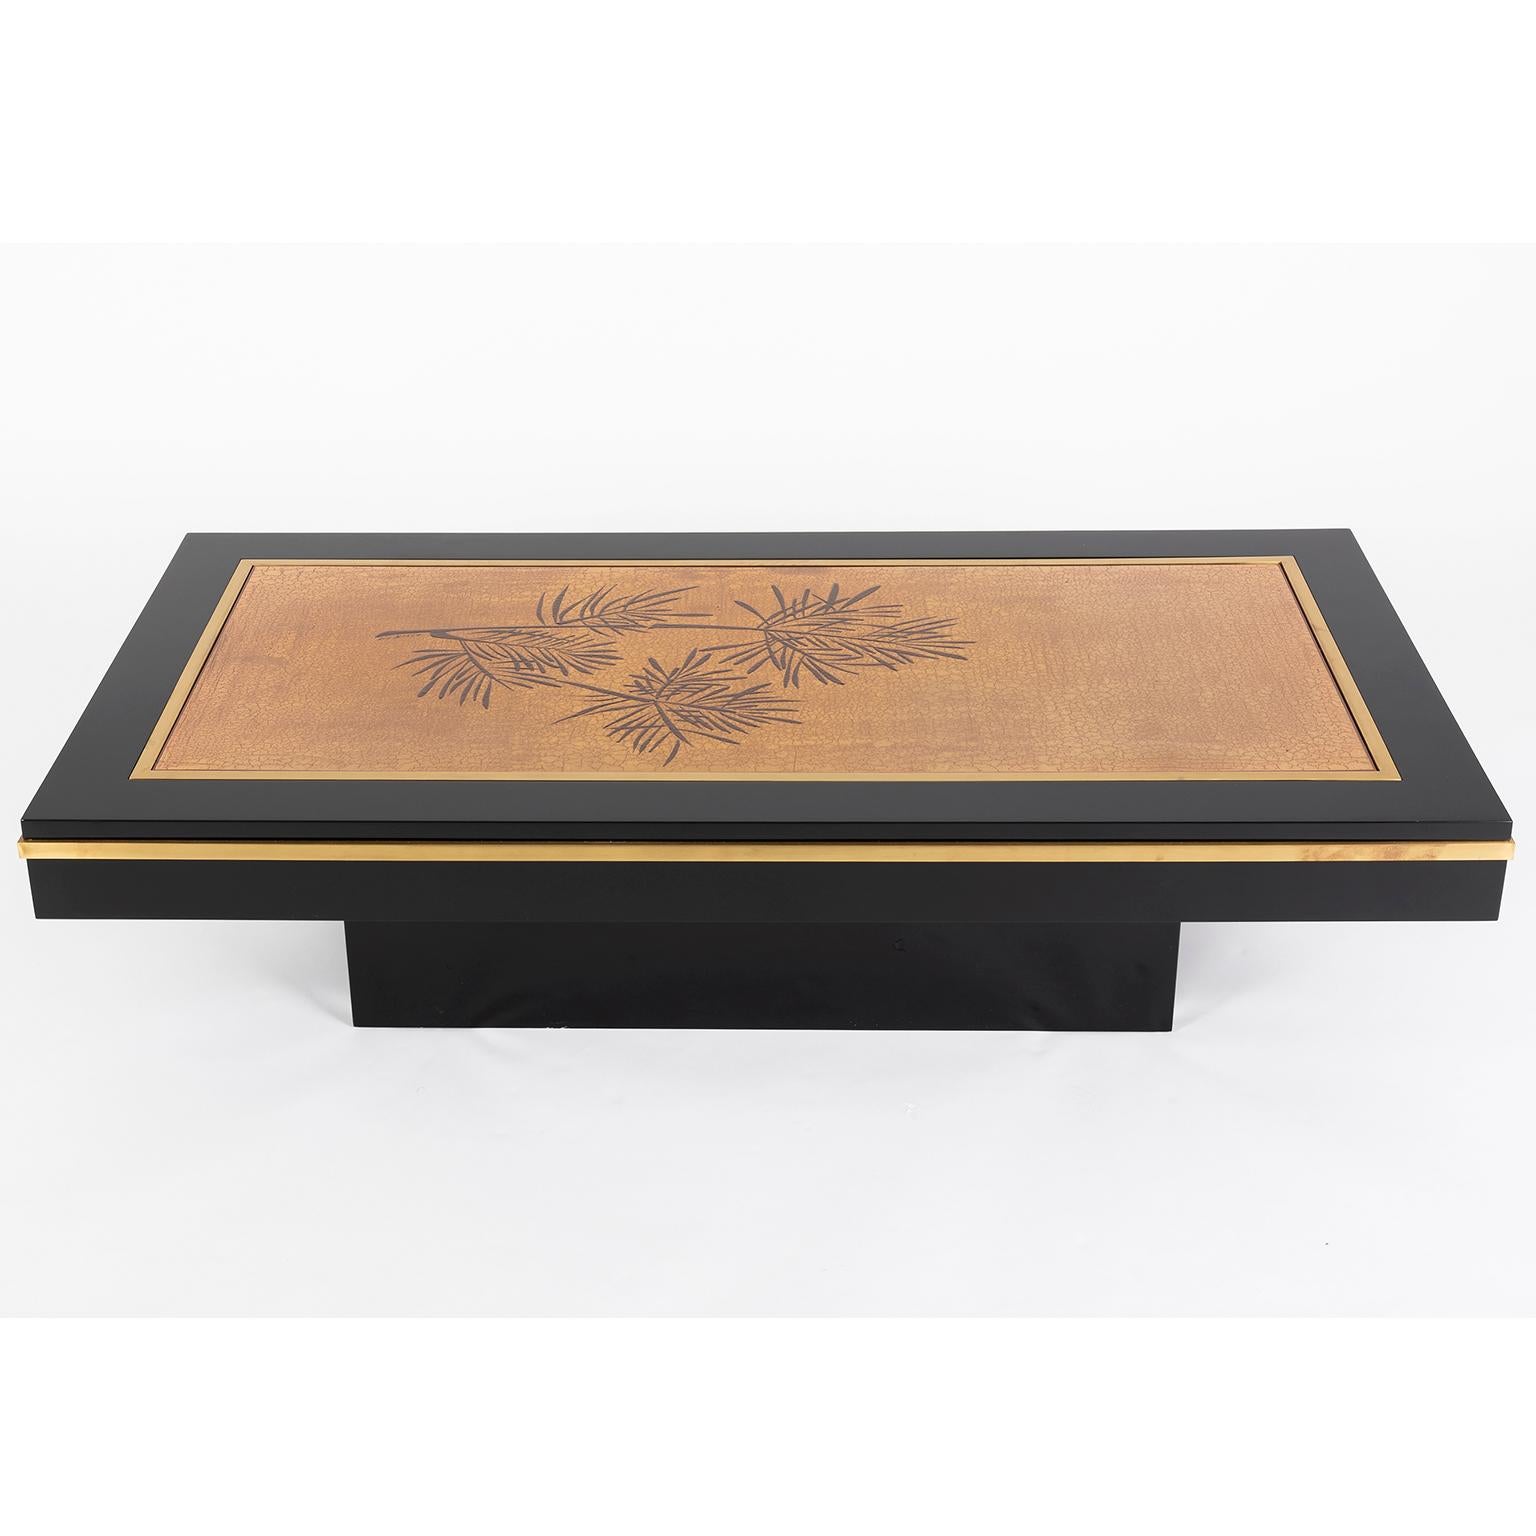 Beautiful Italian coffee table in black lacquered wood with brass frame detail.
The top features an engraved motif with golden and varnished finish with Denisco Signature.
It is a very elegant and delicate piece that has been restored in the black